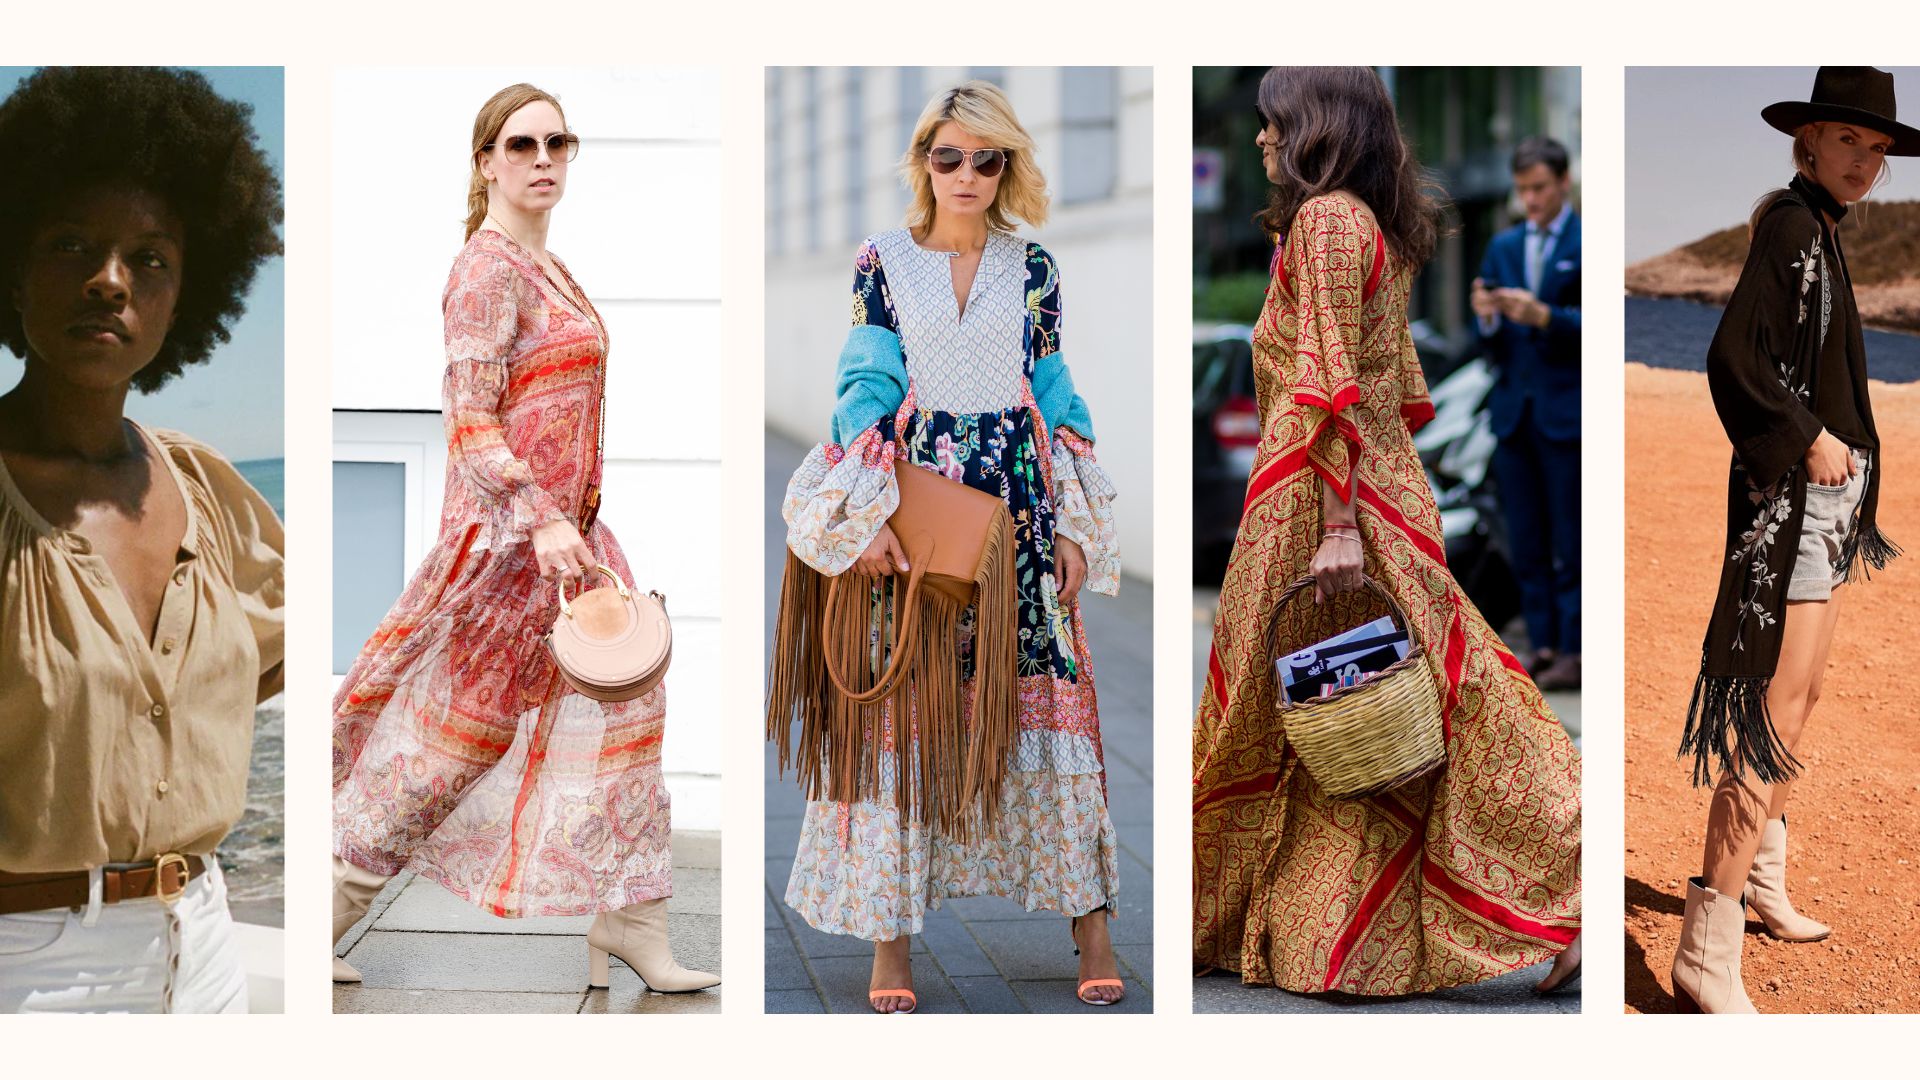 Boho Summer Style: What's Bohemian Fashion And How to Style